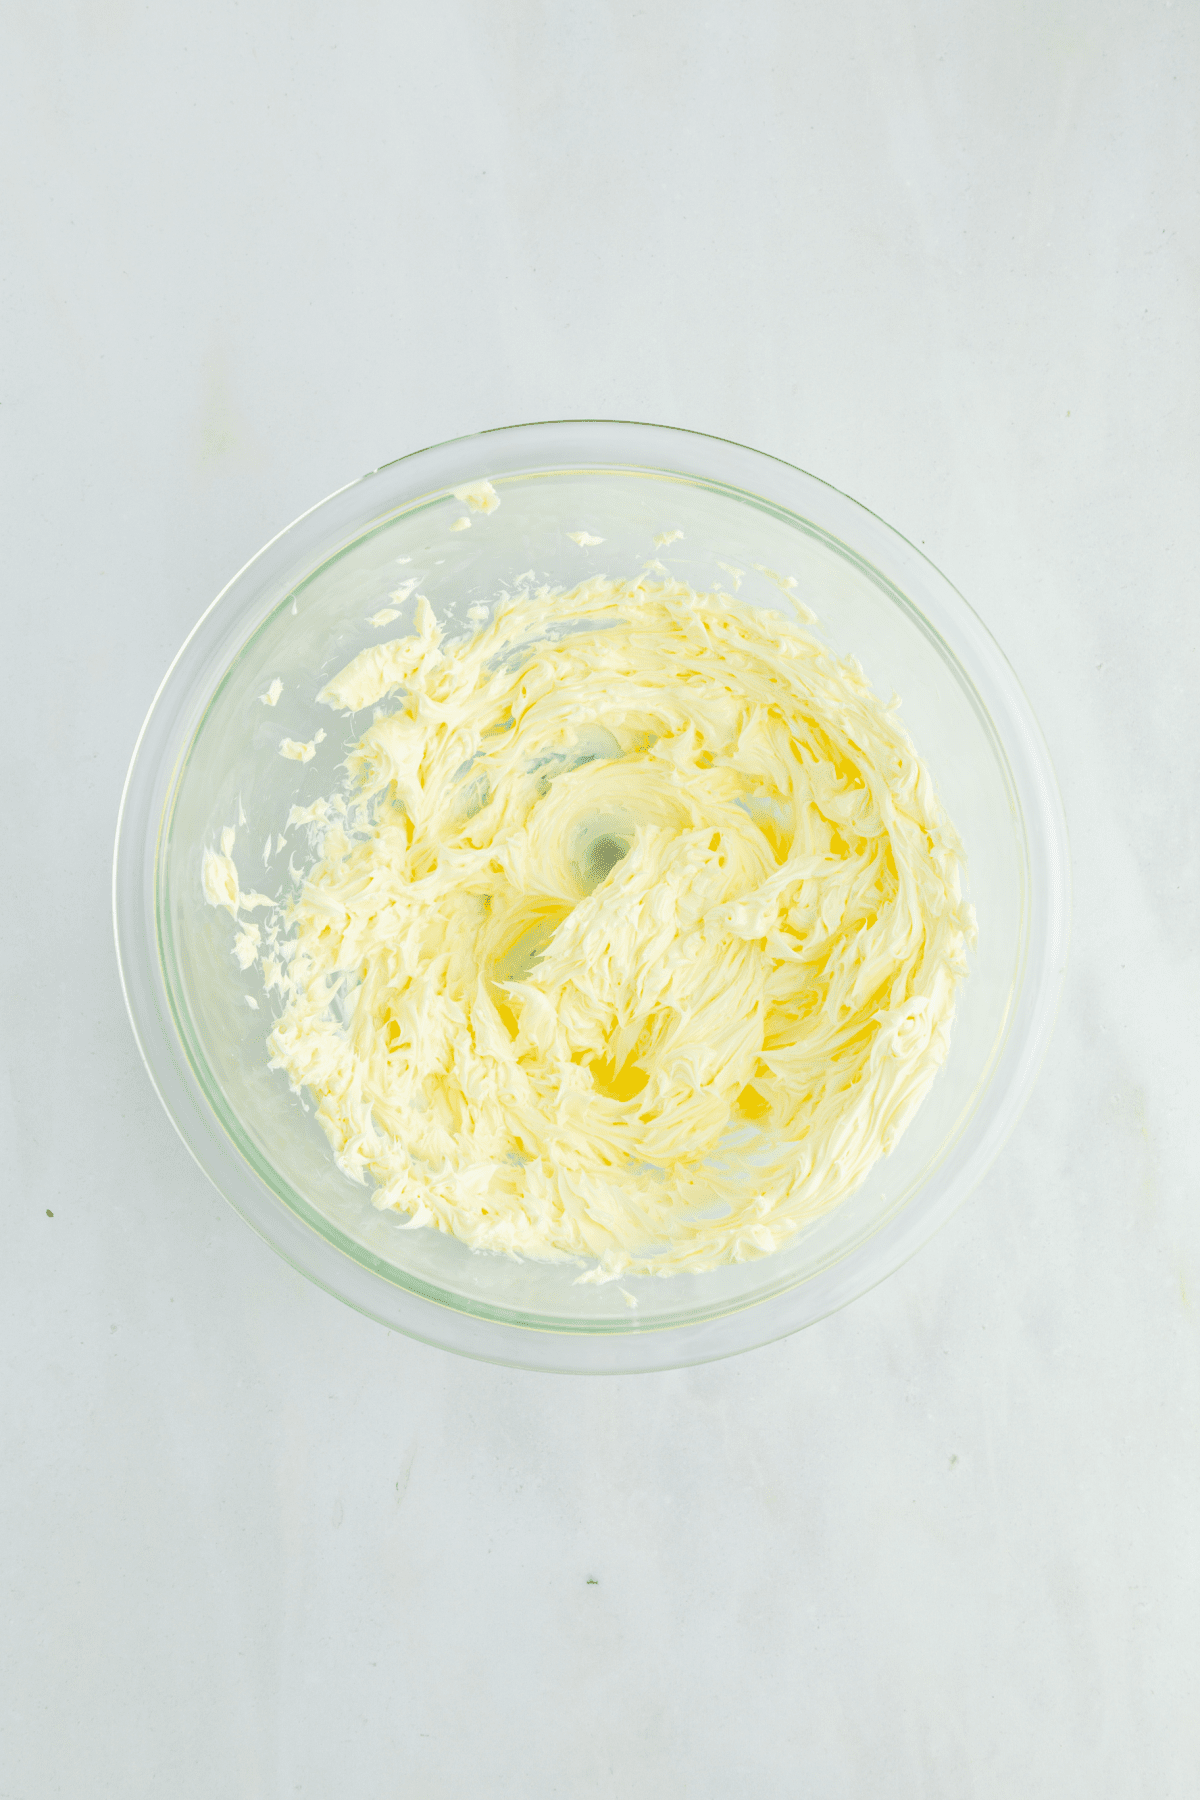 Butter creamed in bowl